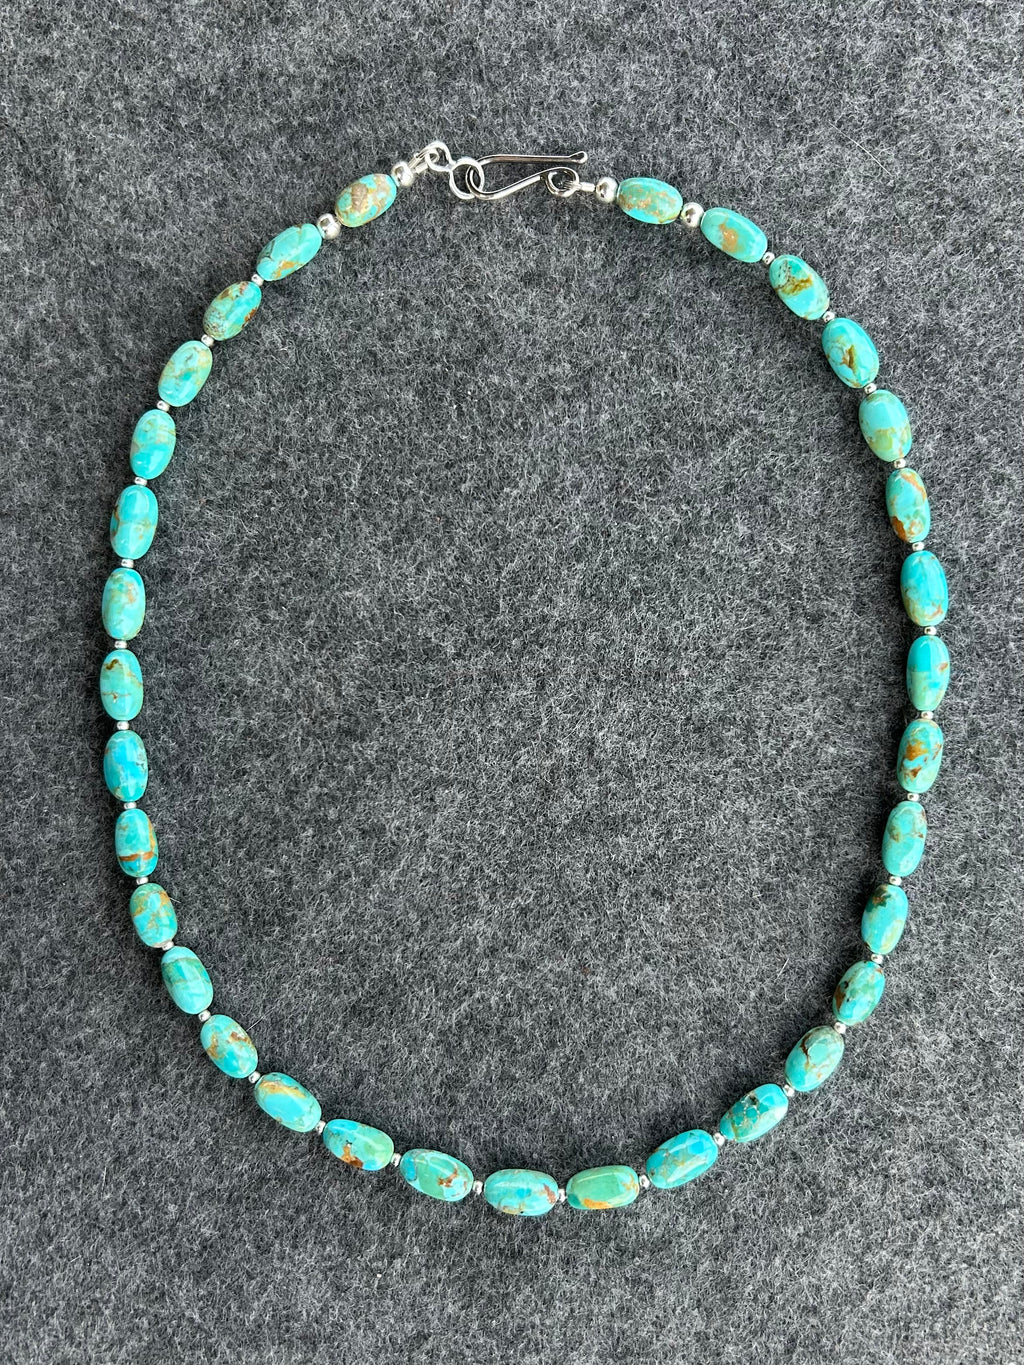 Blue/Green Turquoise Gemstone Layering Necklace with Sterling Silver